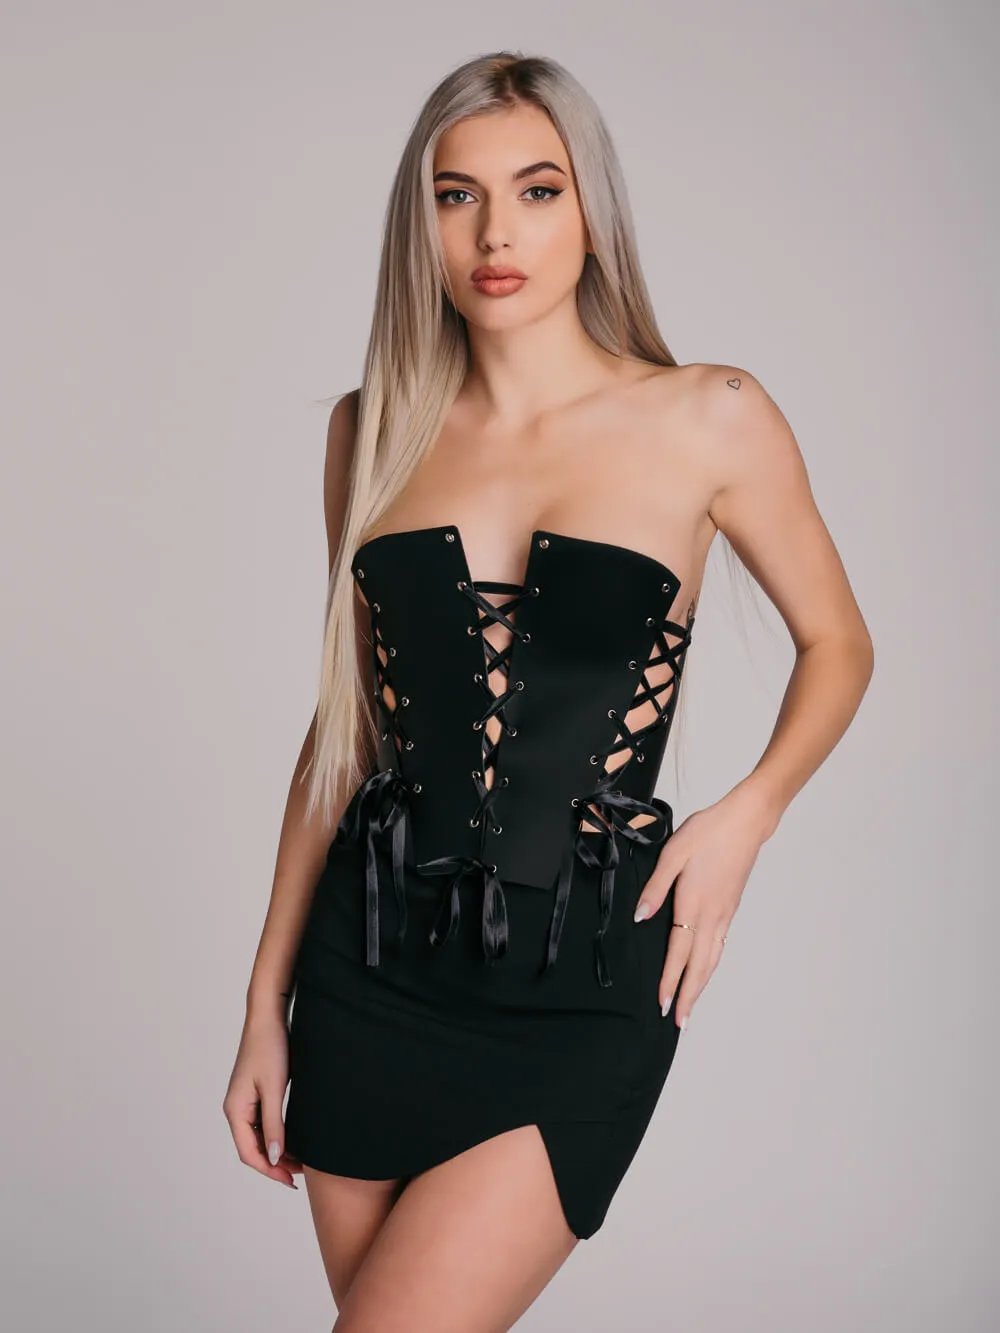 Provocative women's corset Flawless with satin ribbons made of genuine leather.